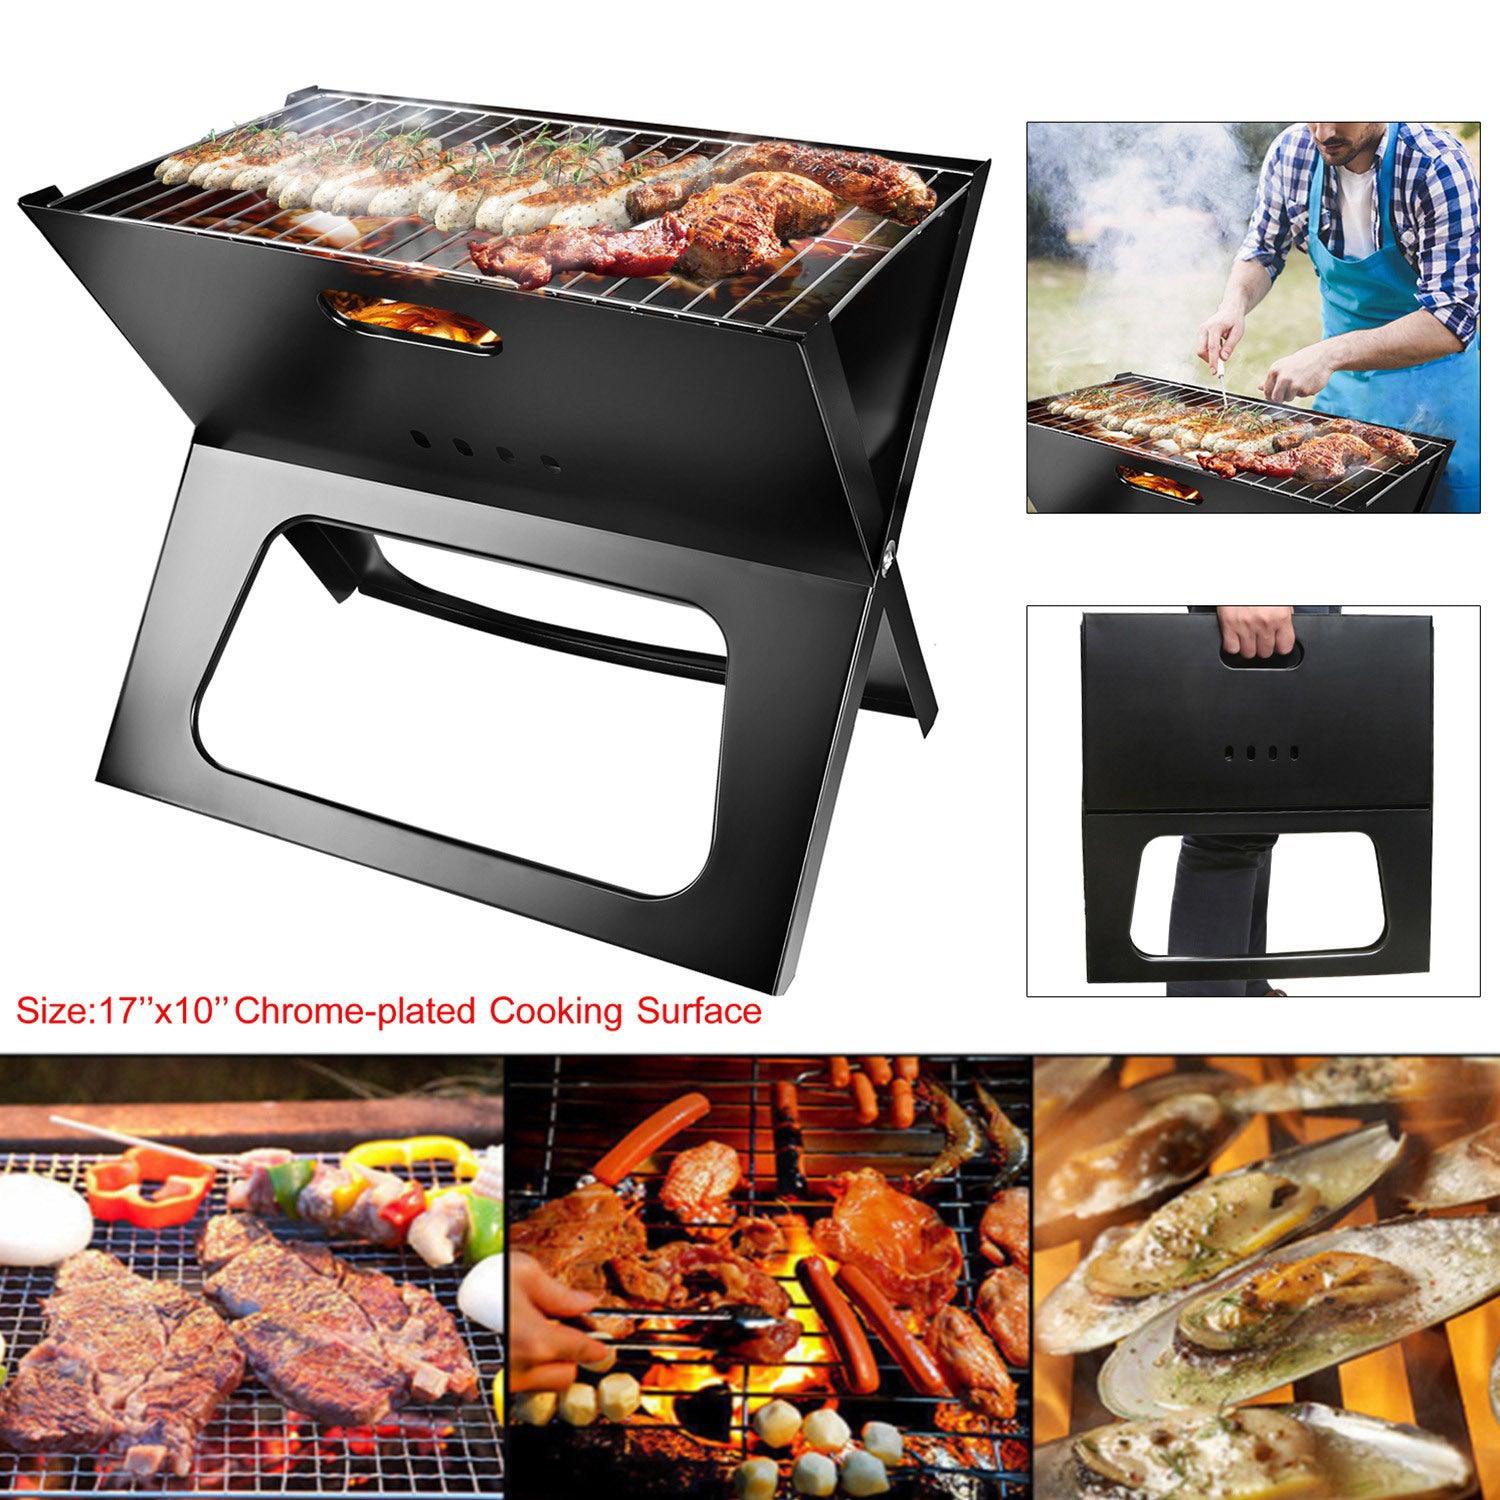 LazyPro B2 Portable BBQ Barbecue Grill Foldable Charcoal Grill Camping Garden Outdoor Travel - Lazy Pro